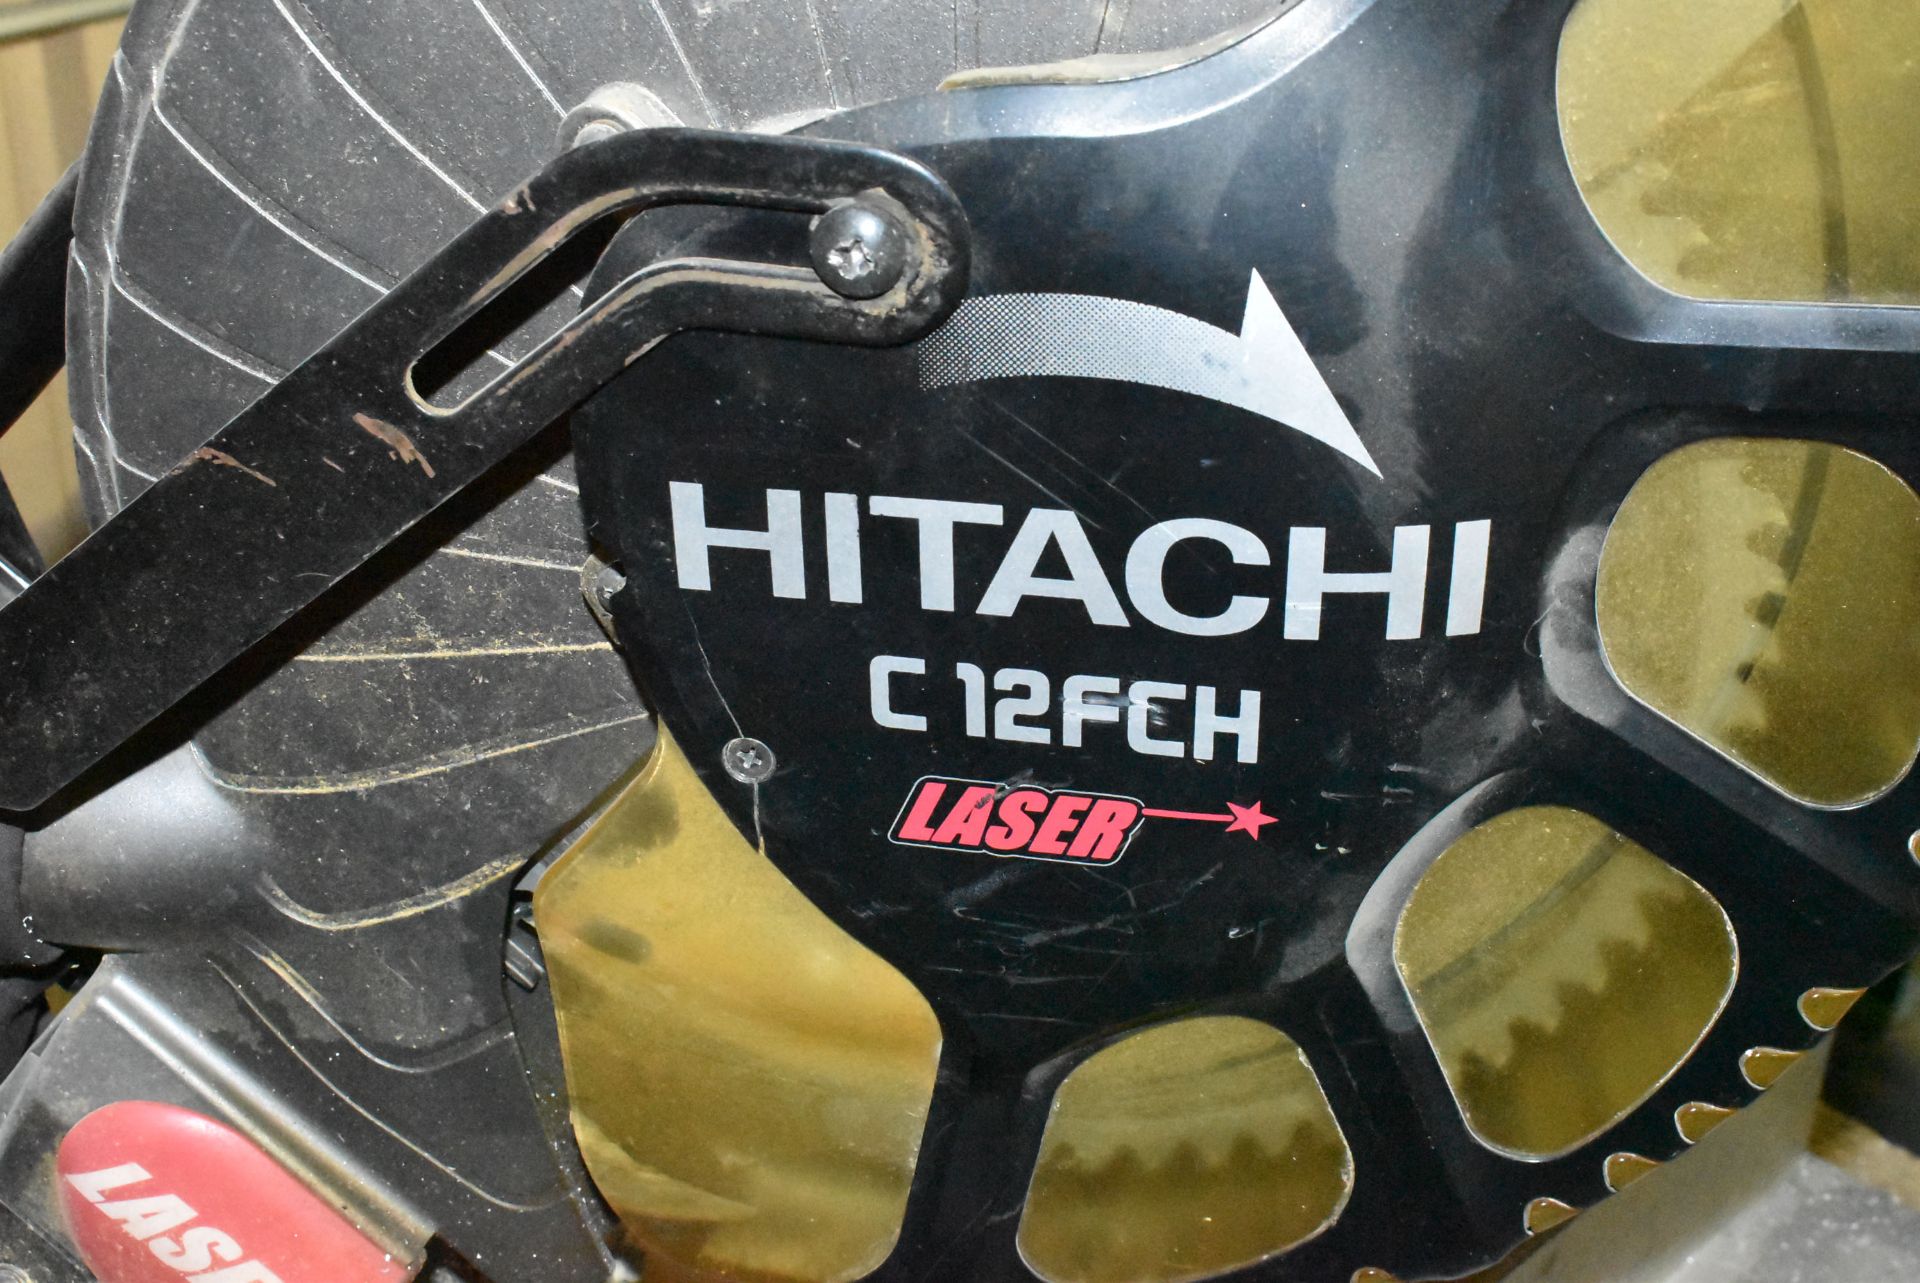 HITACHI C12FCH COMPOUND MITER SAW WITH LASER S/N C070739 - Image 2 of 4